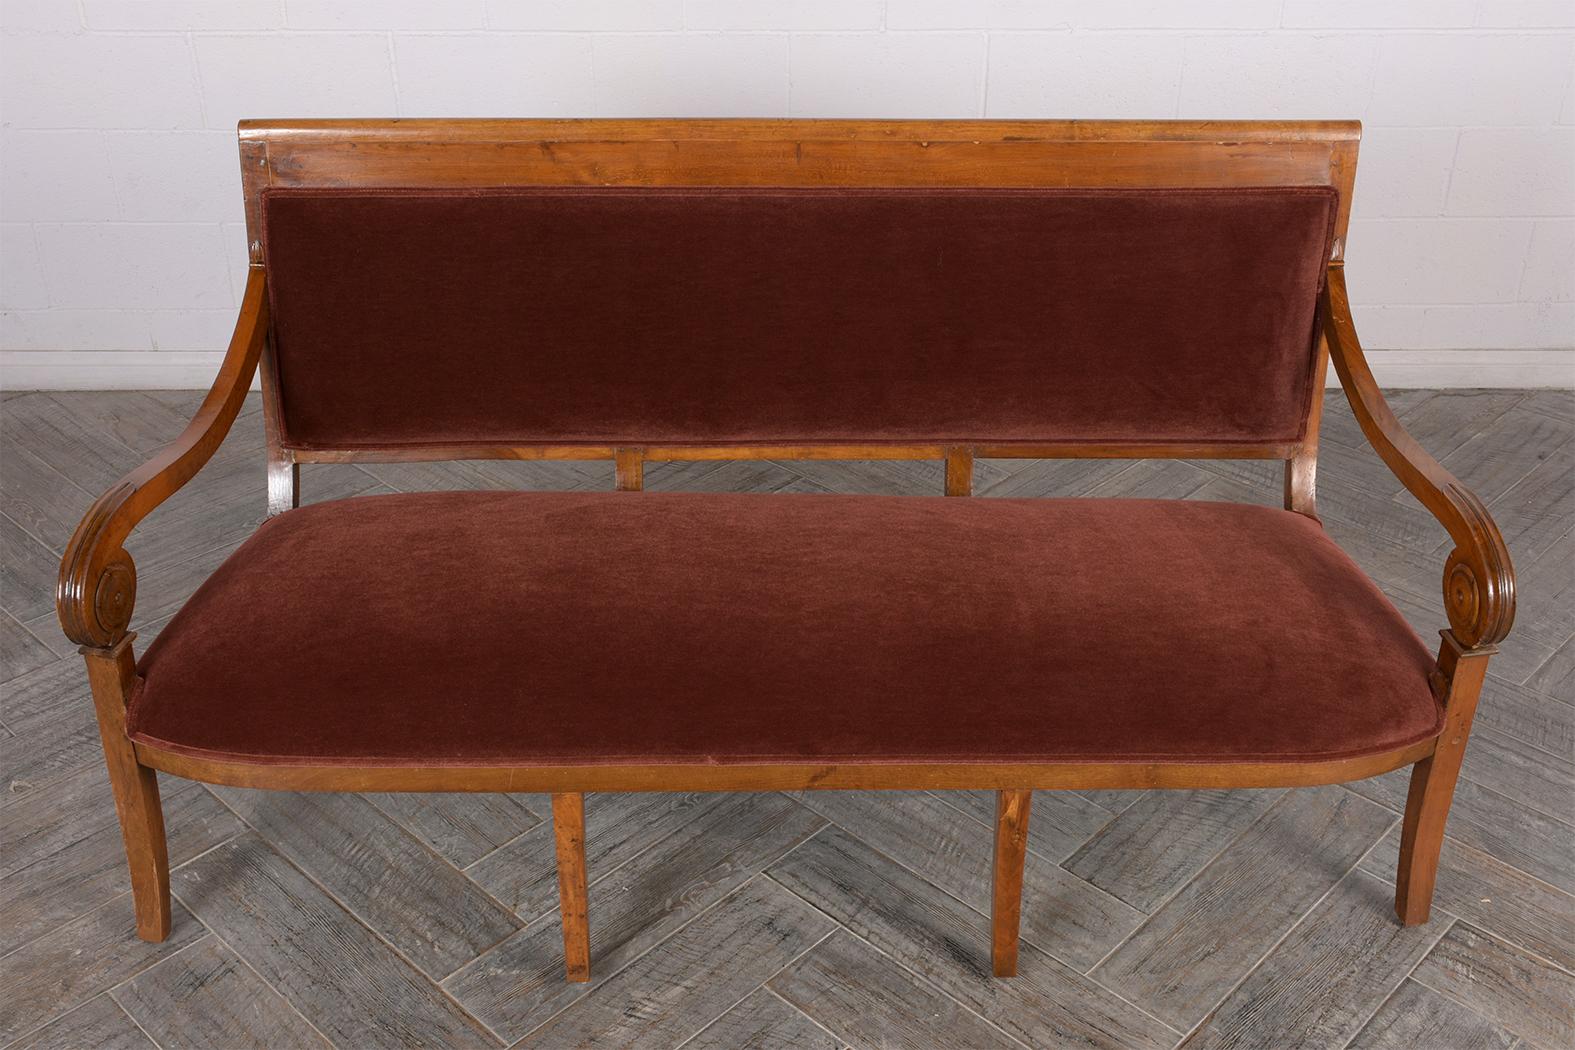 This French circa 1830s Empire Style Sofa bench has been completely restored. The carved frame is made of solid walnut wood finished in its original light walnut and patina finish. The frame features curved scroll armrests and two rows or four